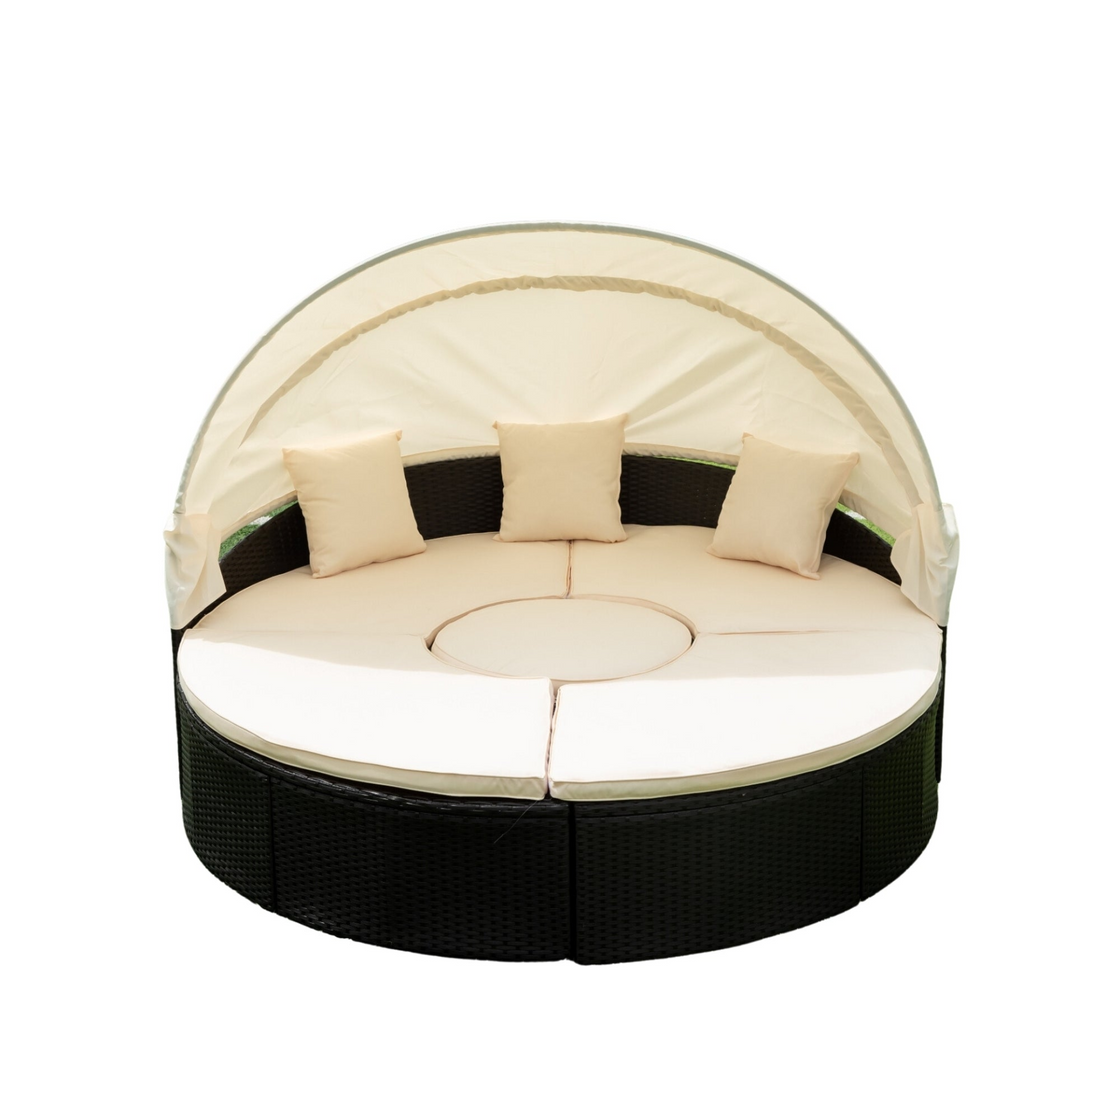 Outdoor Patio Round Daybed with Retractable Canopy | Black Wicker + Creme Cushion